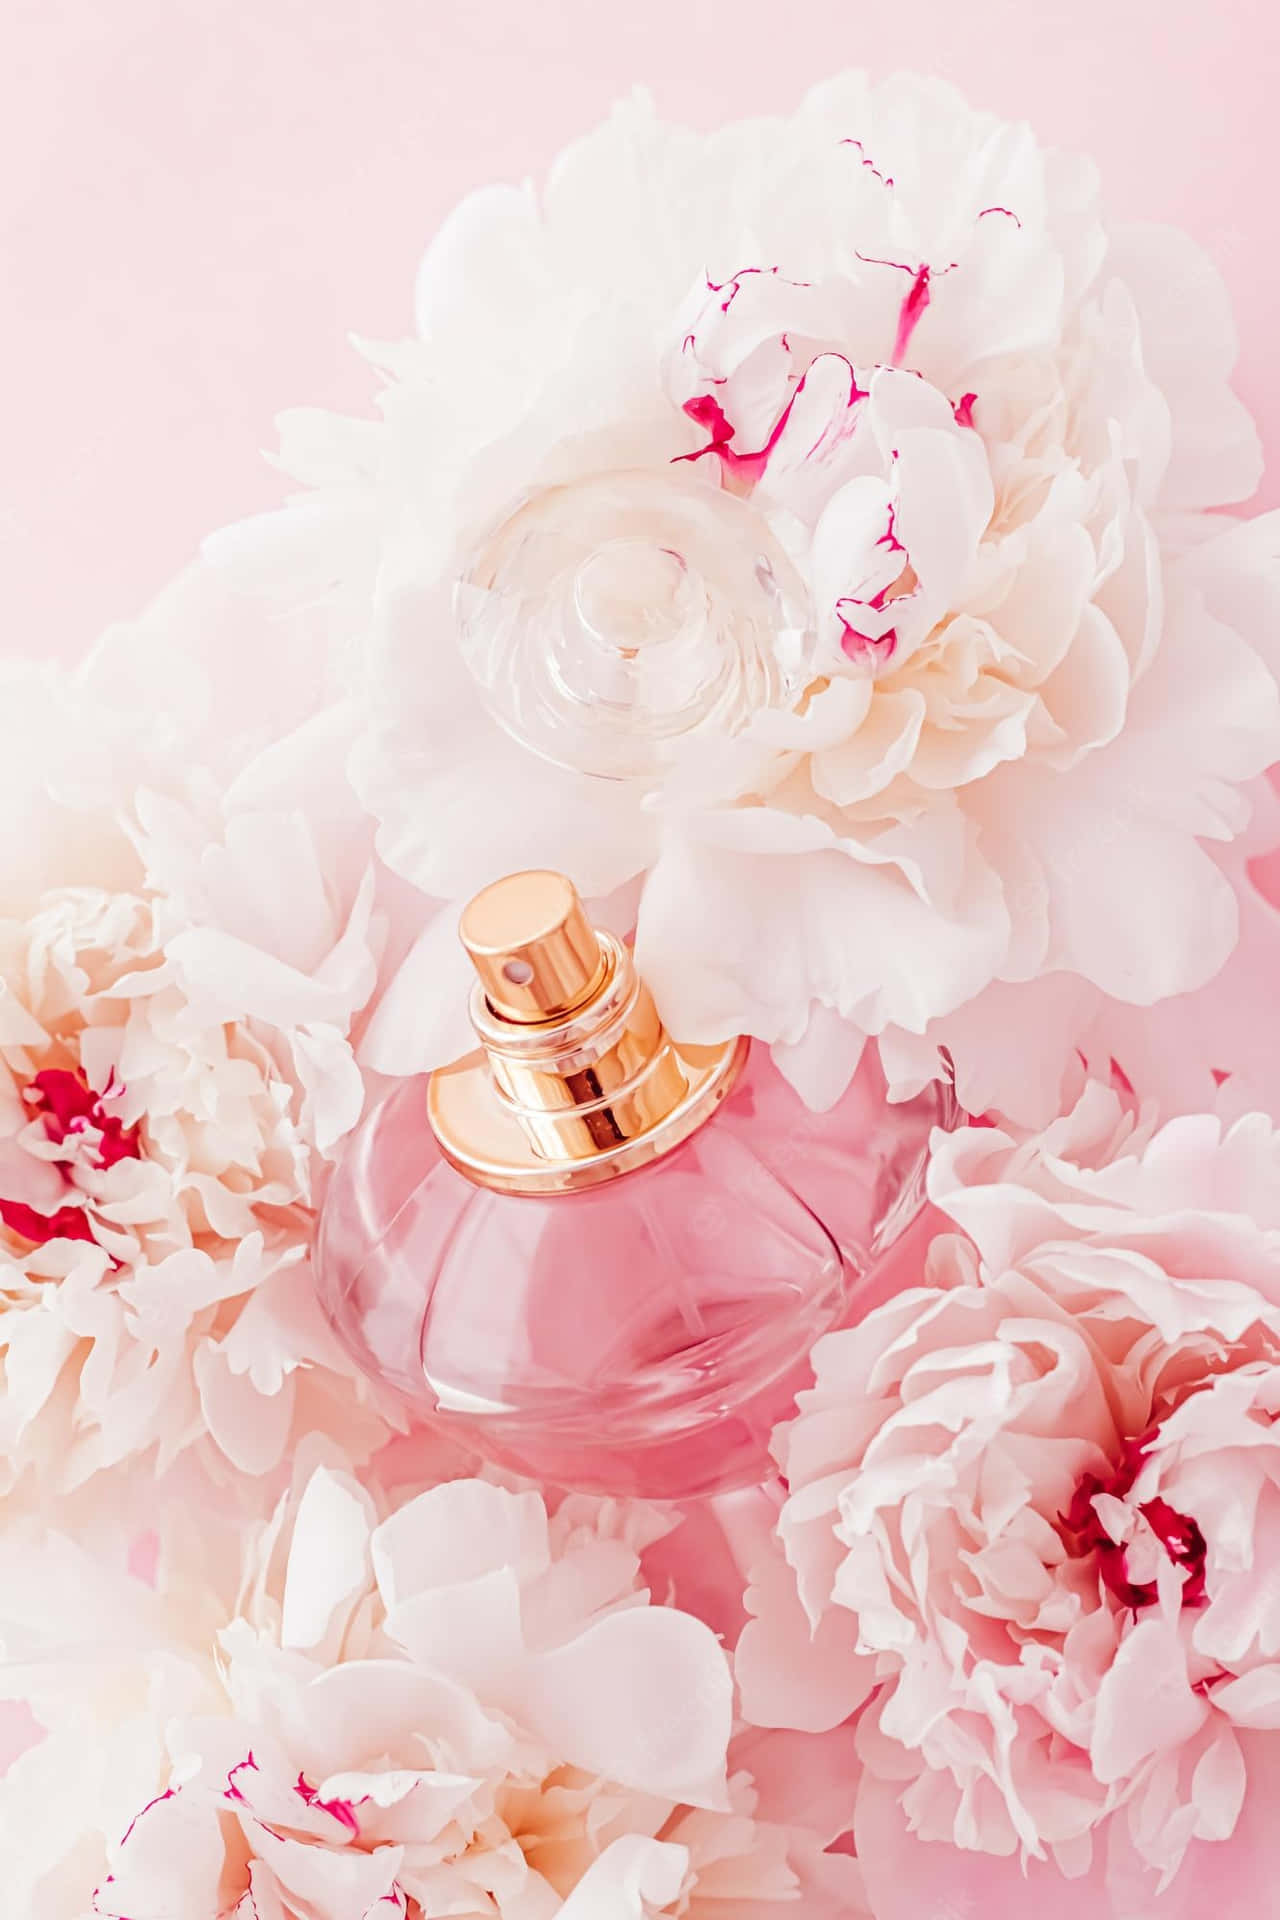 A mesmerizing Floral Fragrance in vibrant colors Wallpaper